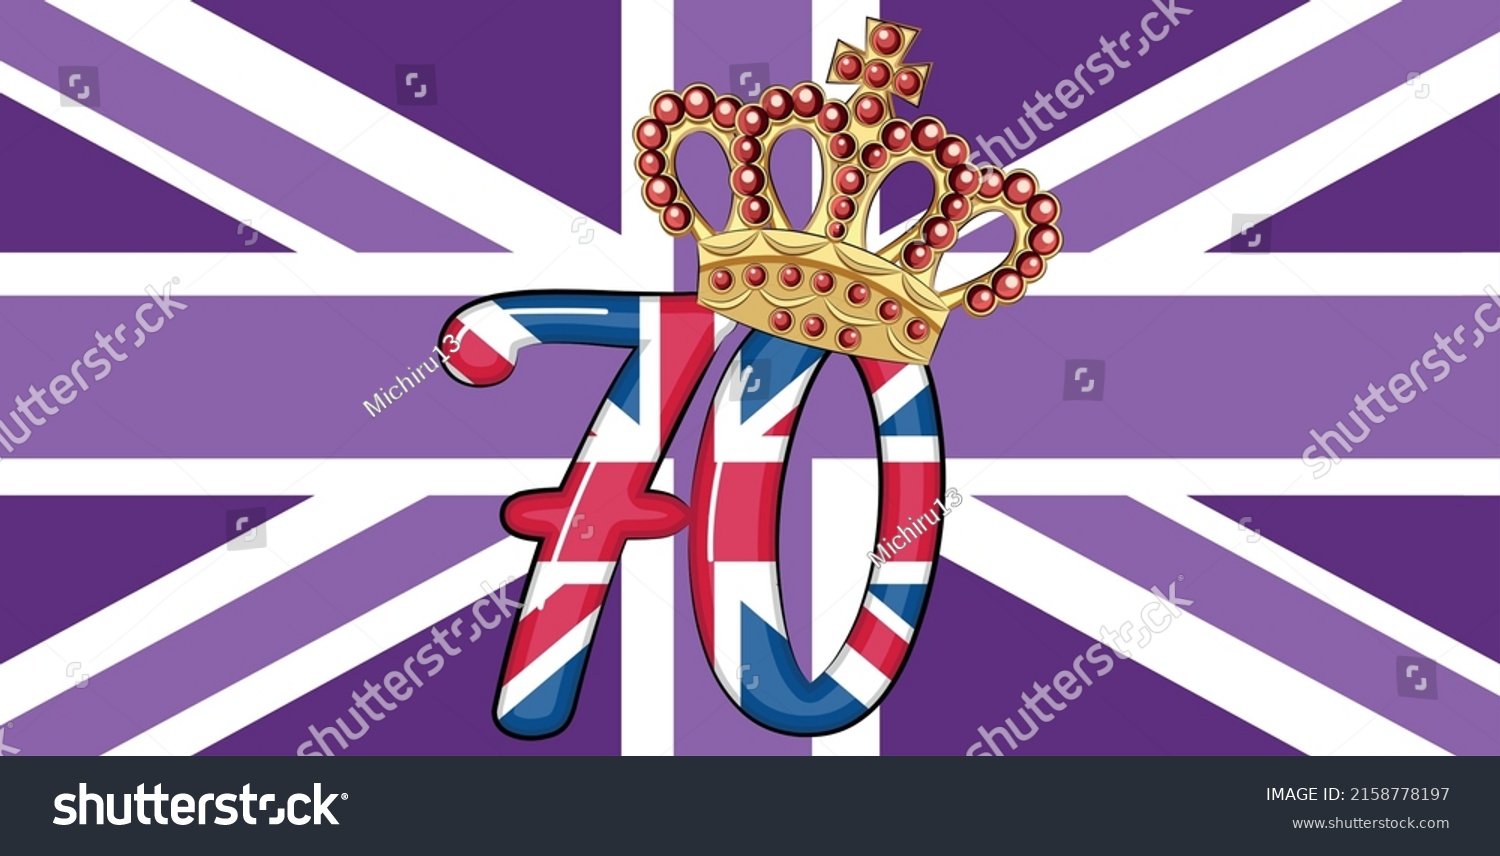 SVG of Queen Elizabeth's Platinum Jubilee celebration poster against the backdrop of the Union Jack, reigning 70 years since 1952 svg